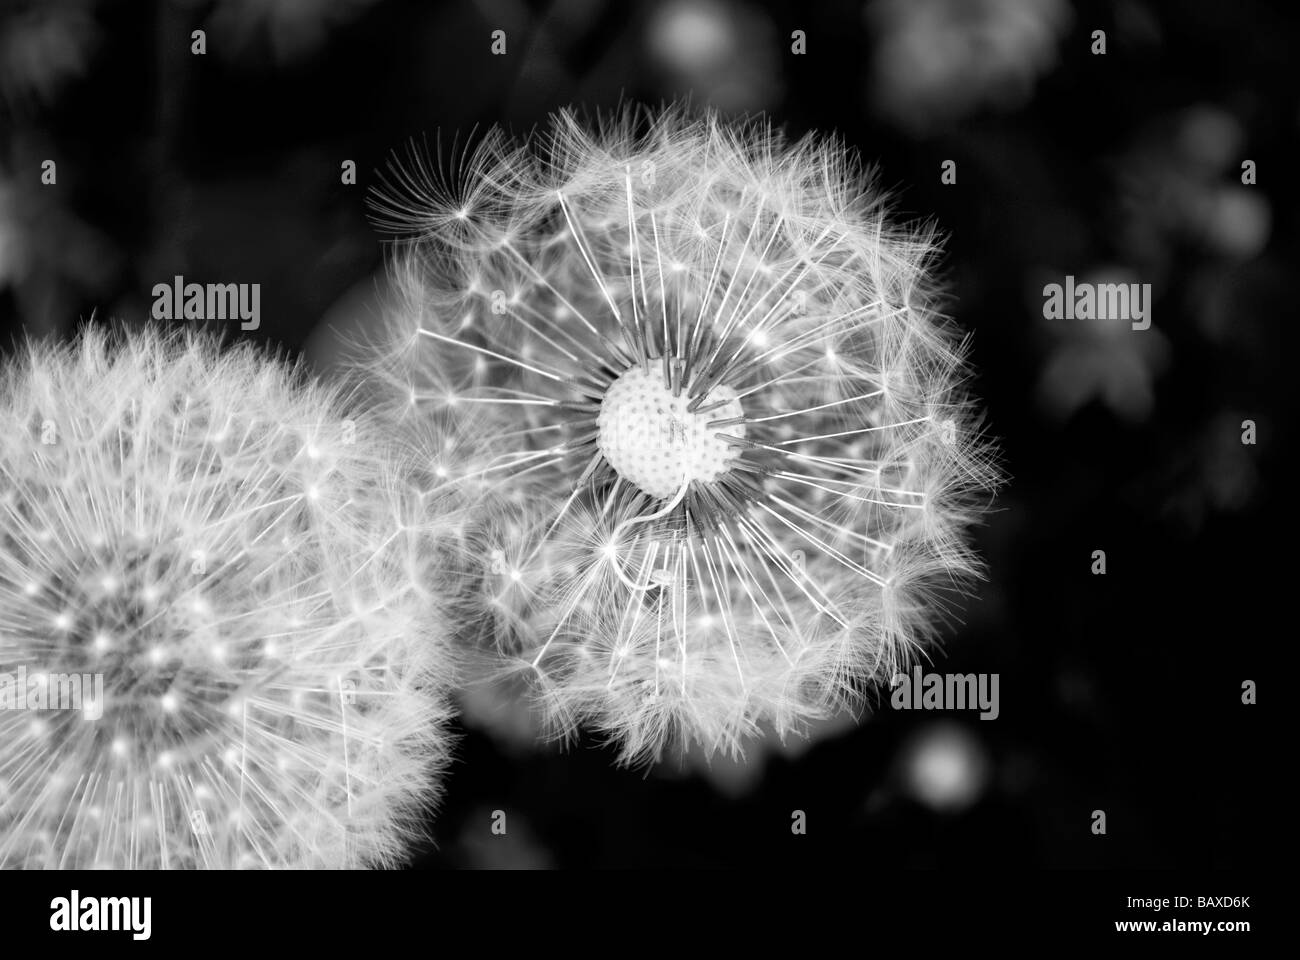 Dandelion seed heads in black and white Stock Photo